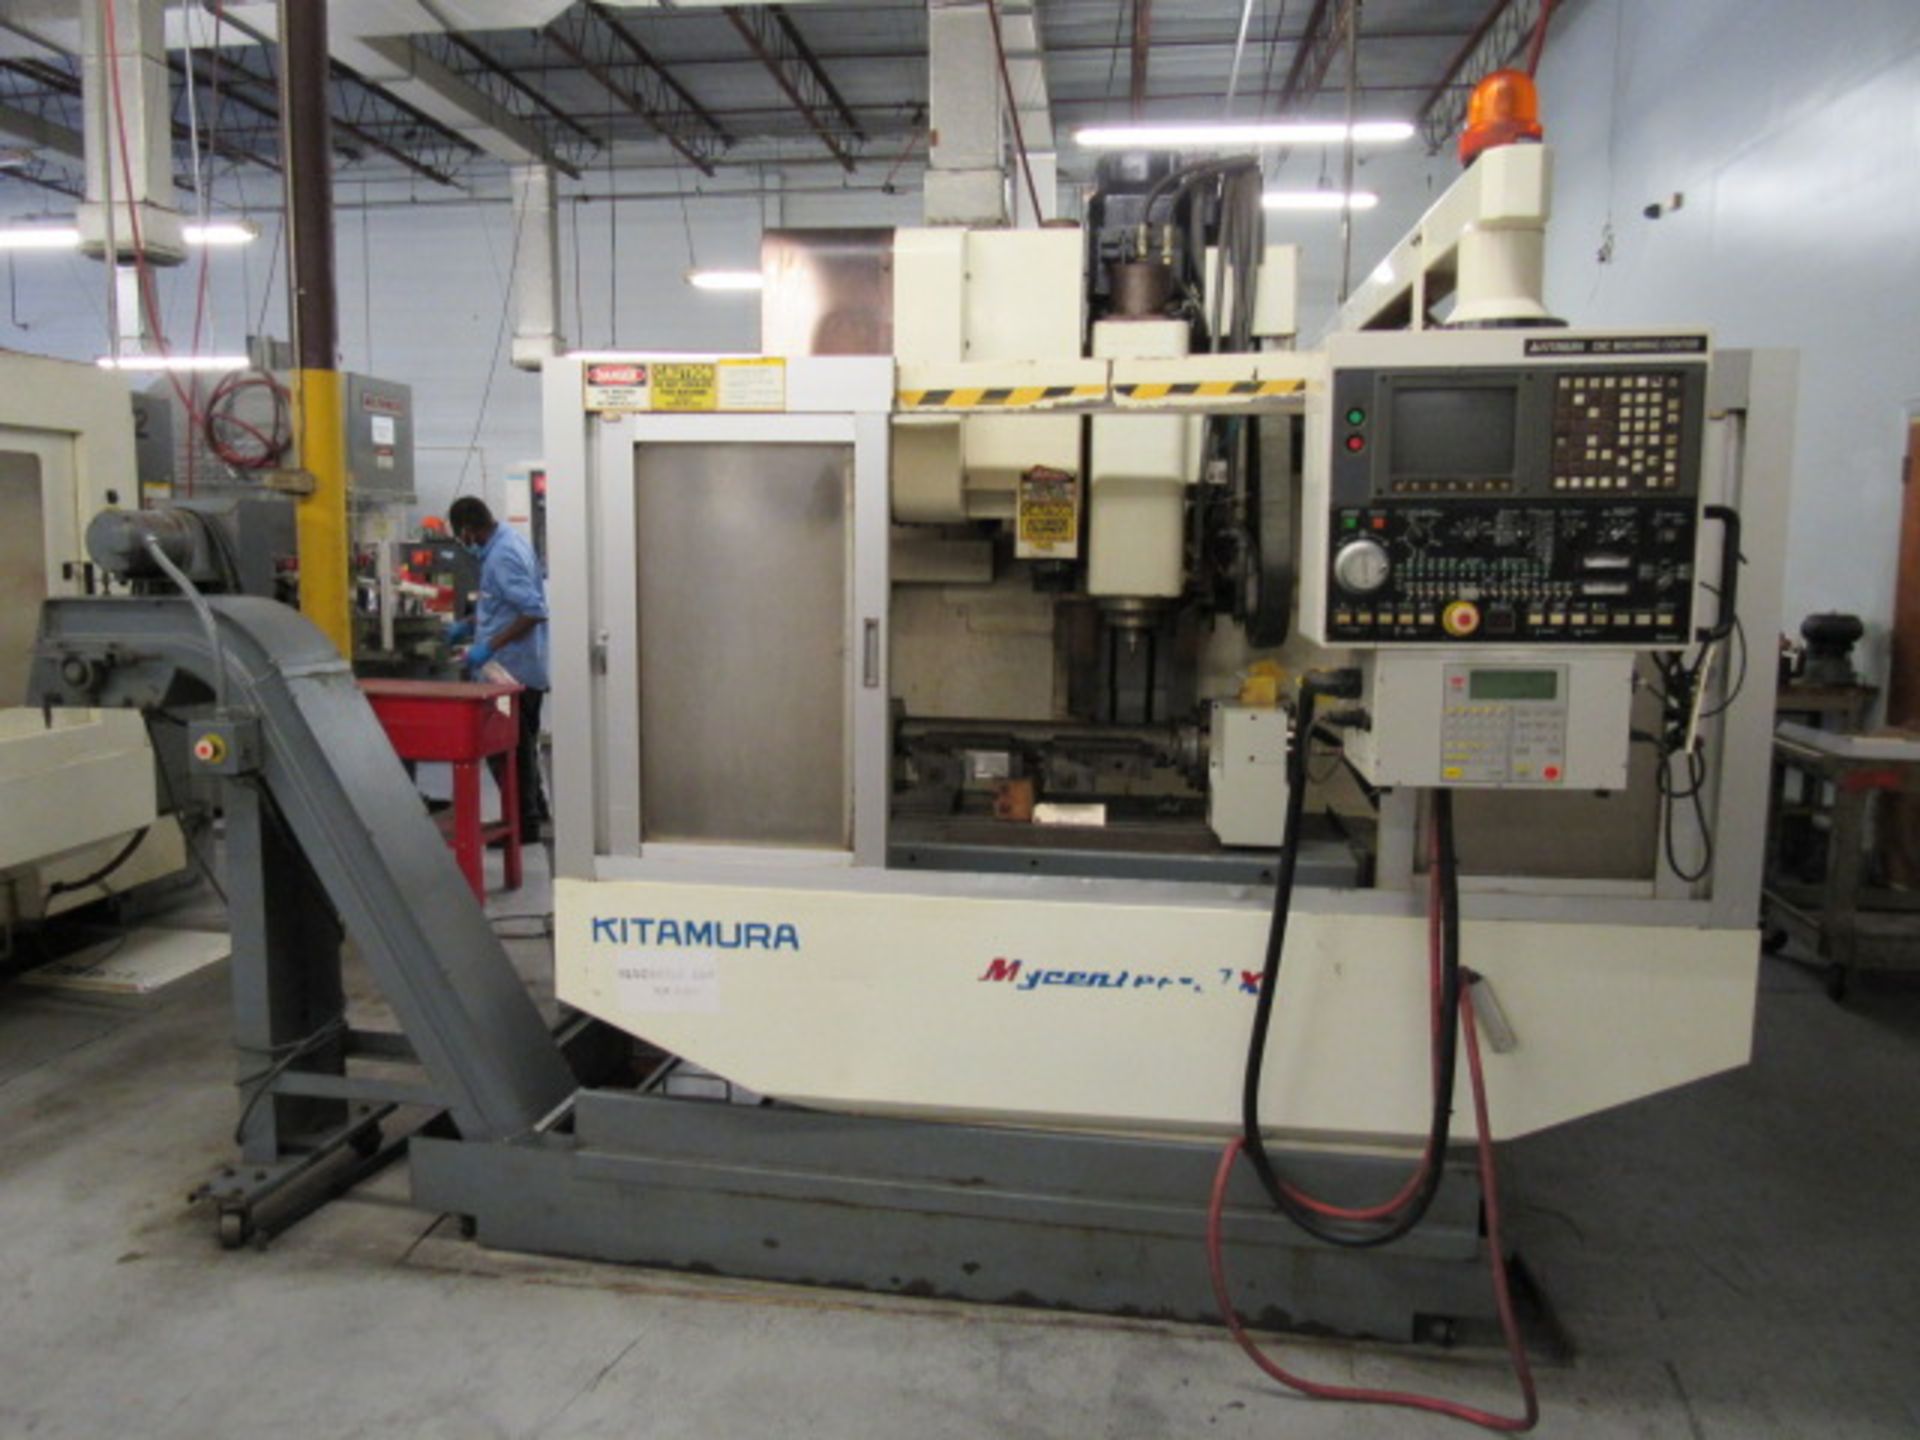 Kitamura MyCenter 3X Wired for 4th Axis CNC Vertical Machining Center - Image 2 of 8